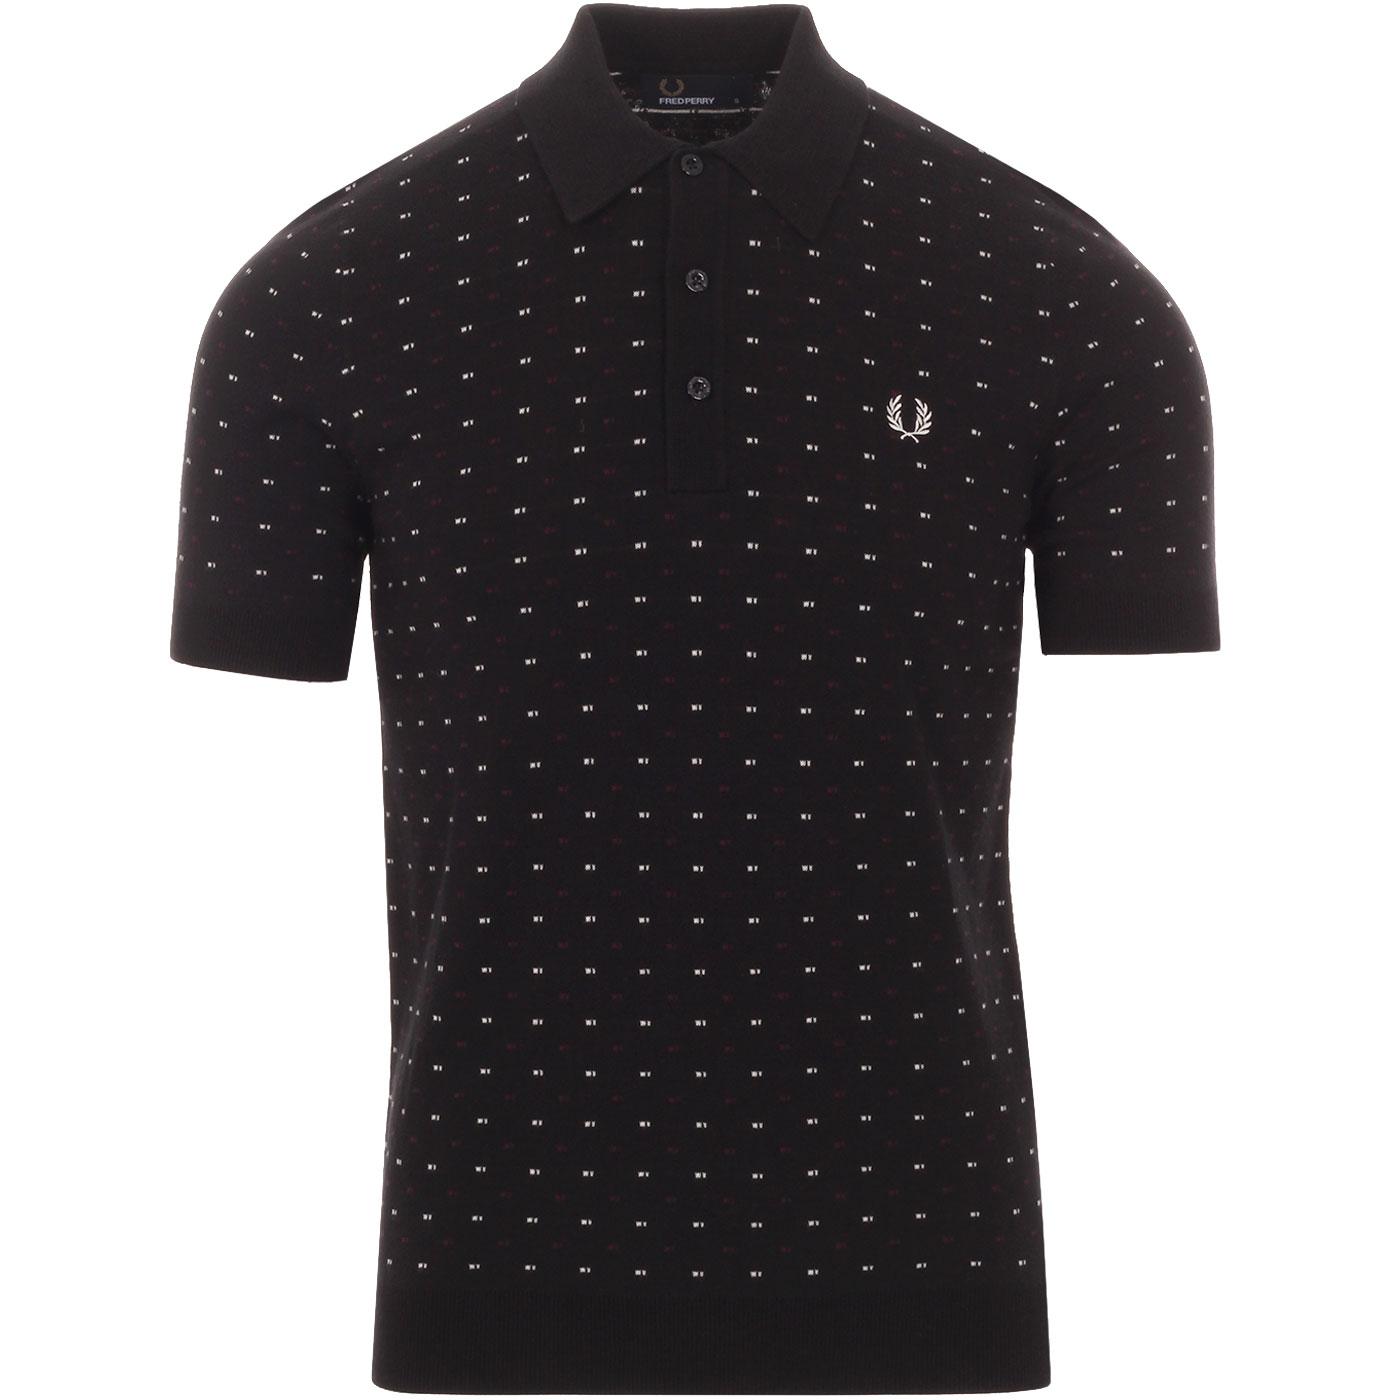 FRED PERRY Men's Retro Knitted Jacquard Polo Shirt